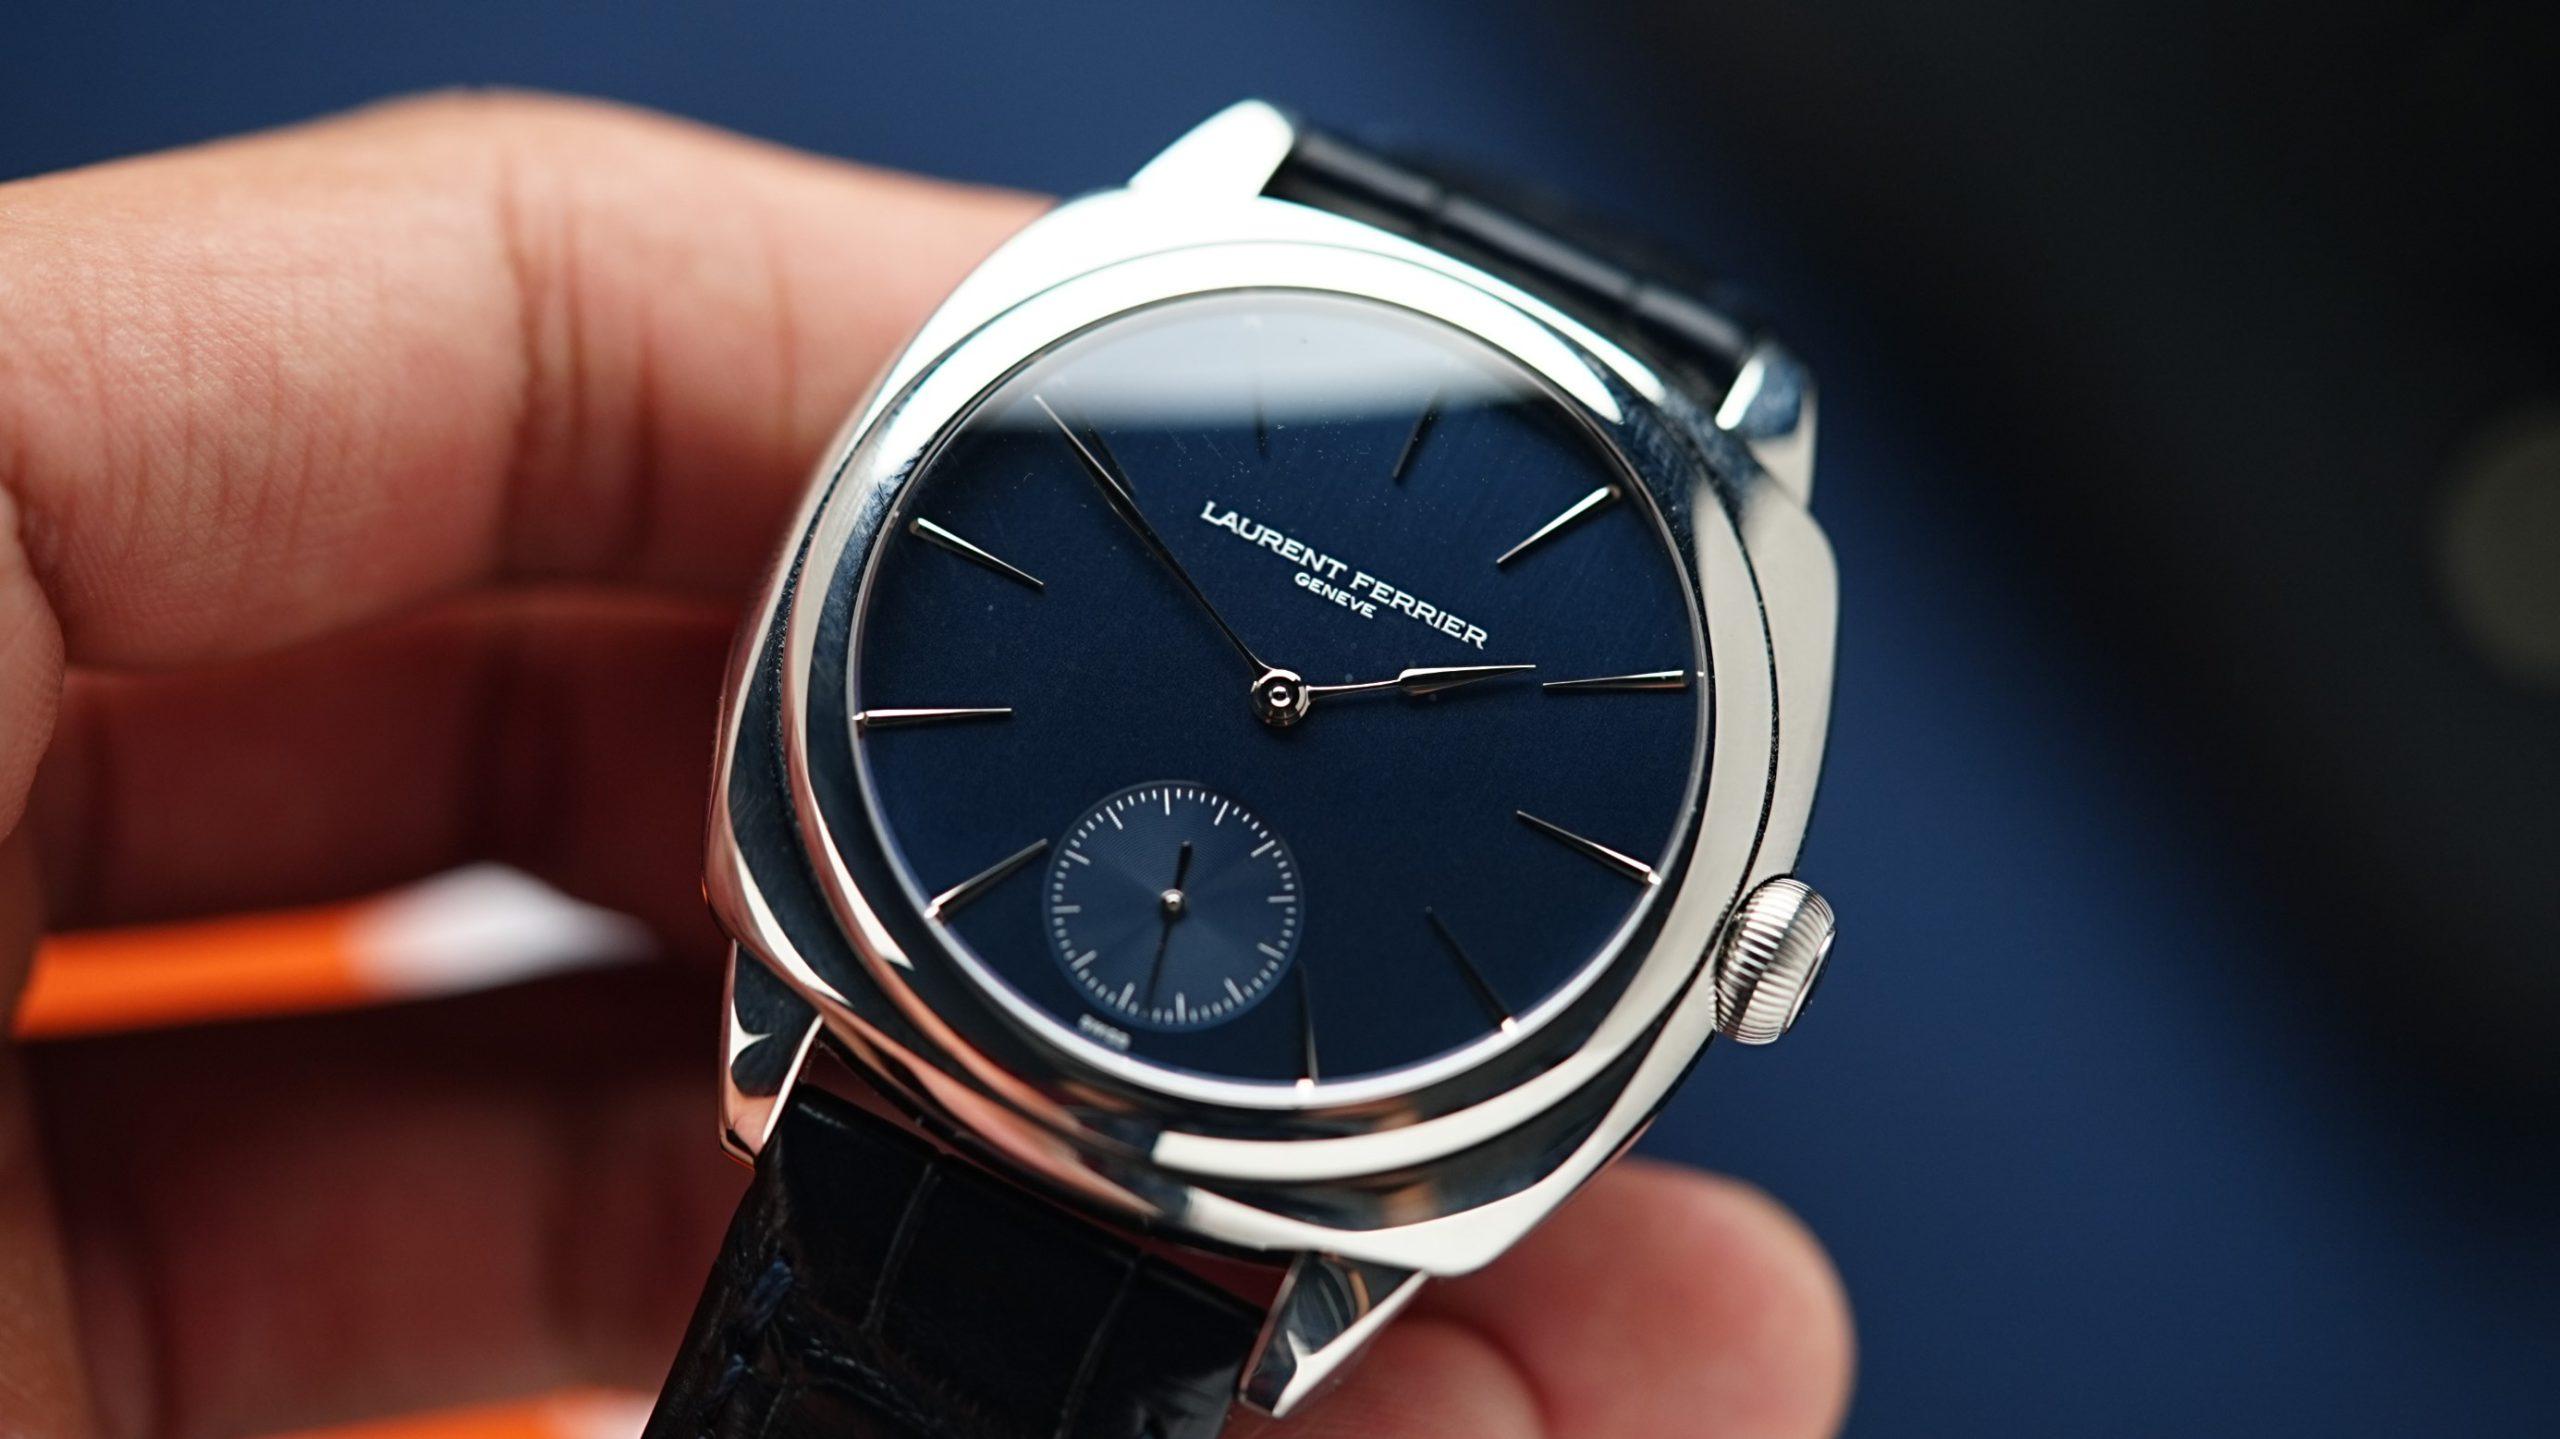 Laurent Ferrier MICRO-ROTOR GALET SQUARE being held in hand.